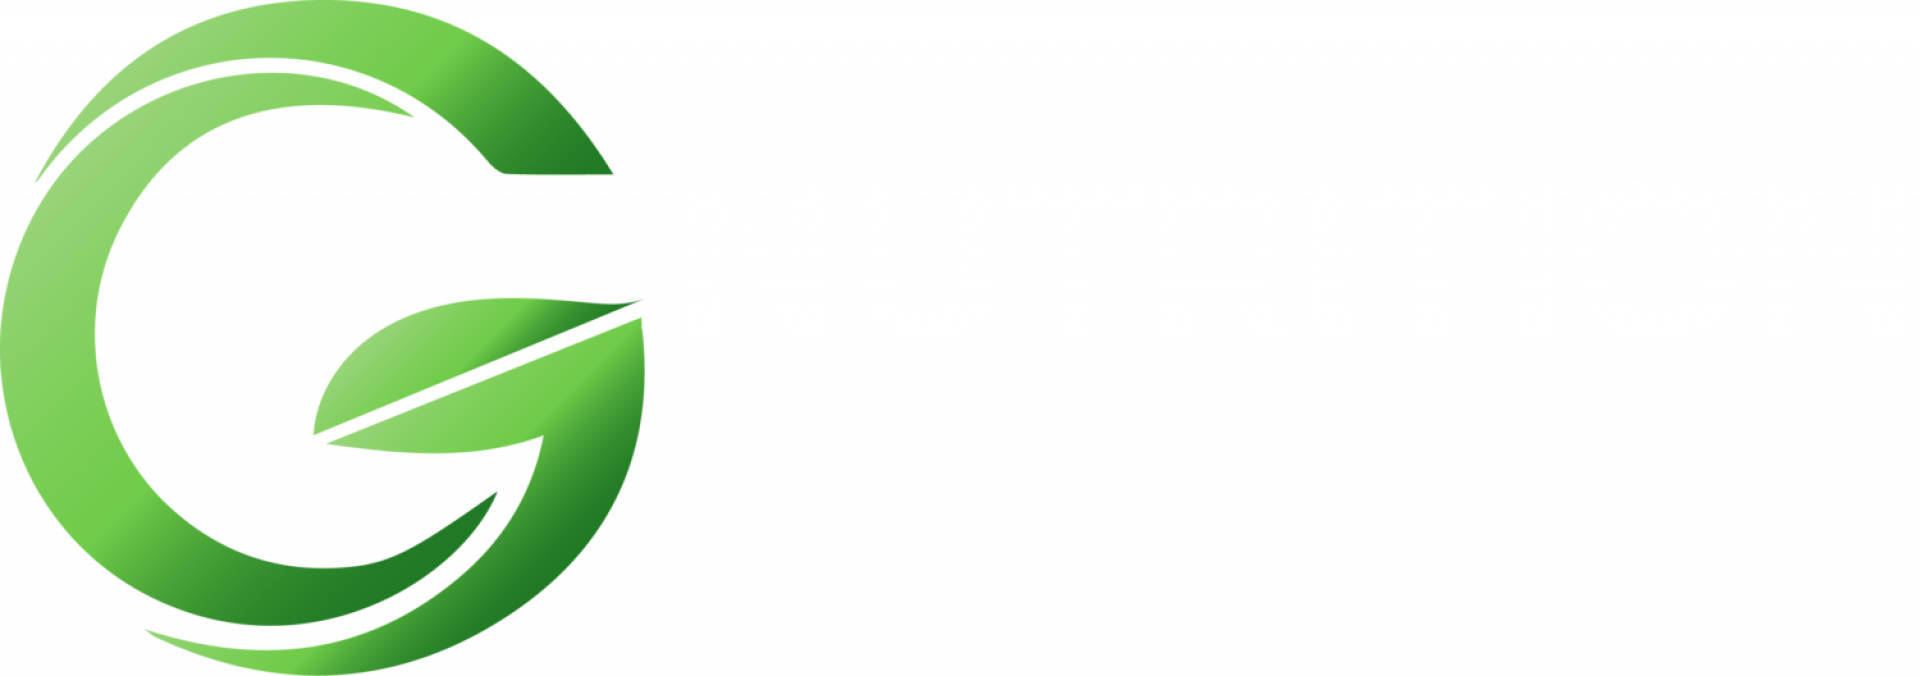 G Nutrition